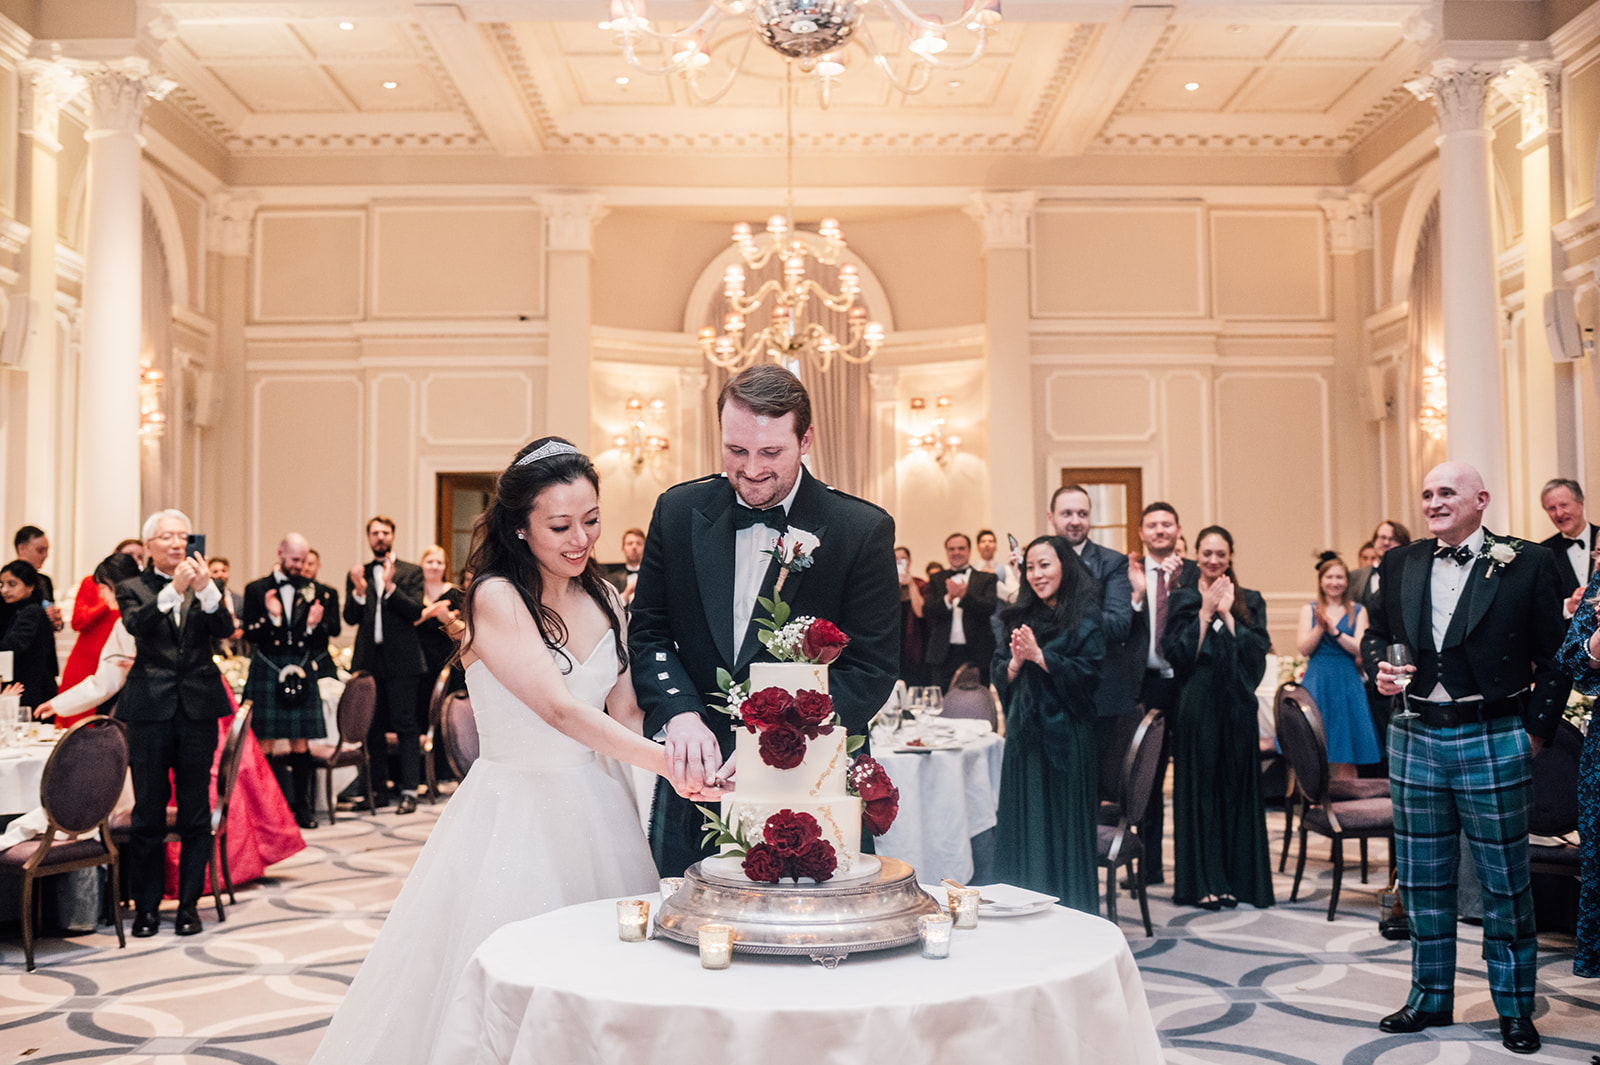 Bride and Groom cutting the cake in the ballroom at Corinthia hotel in London